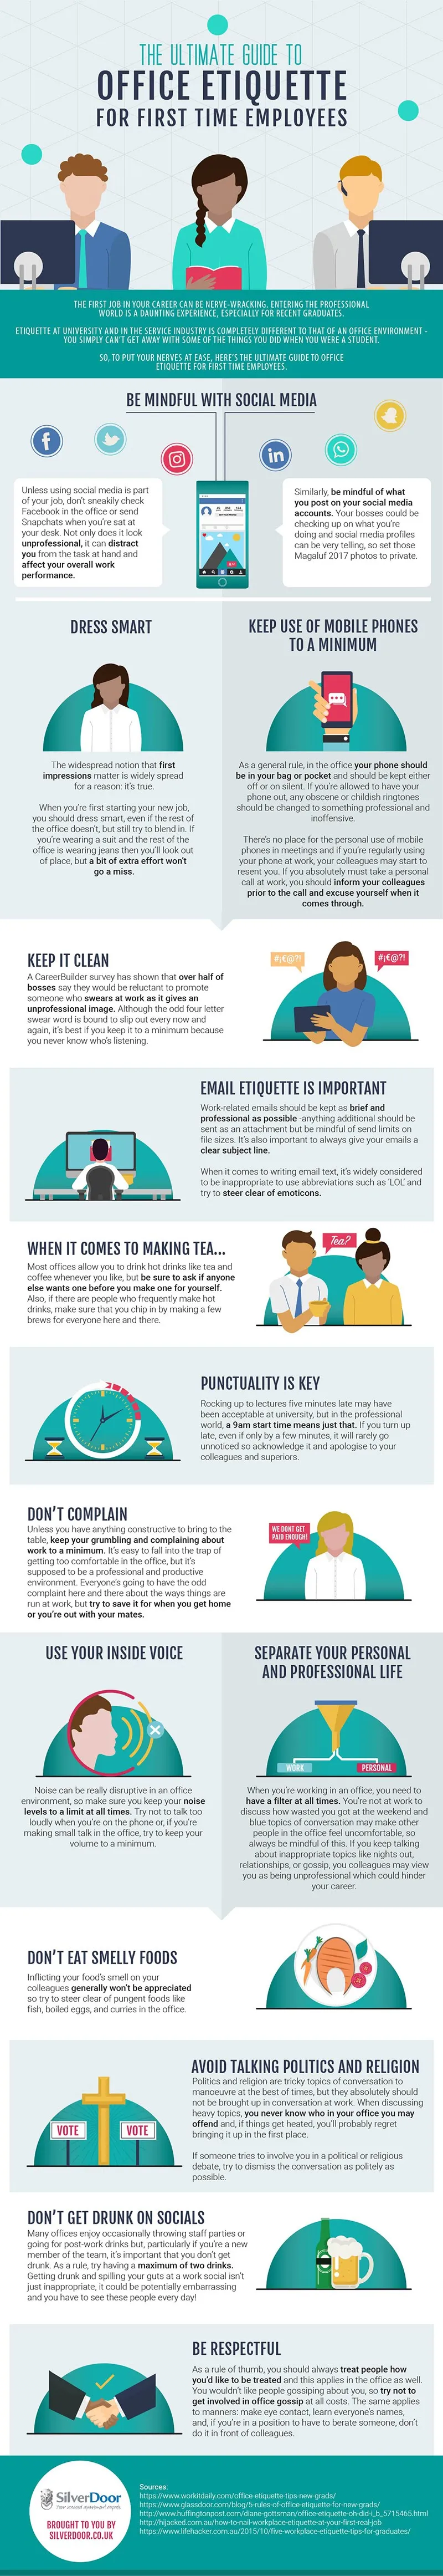 The Ultimate Guide To Office Etiquette For First Time Employees - #Infographic